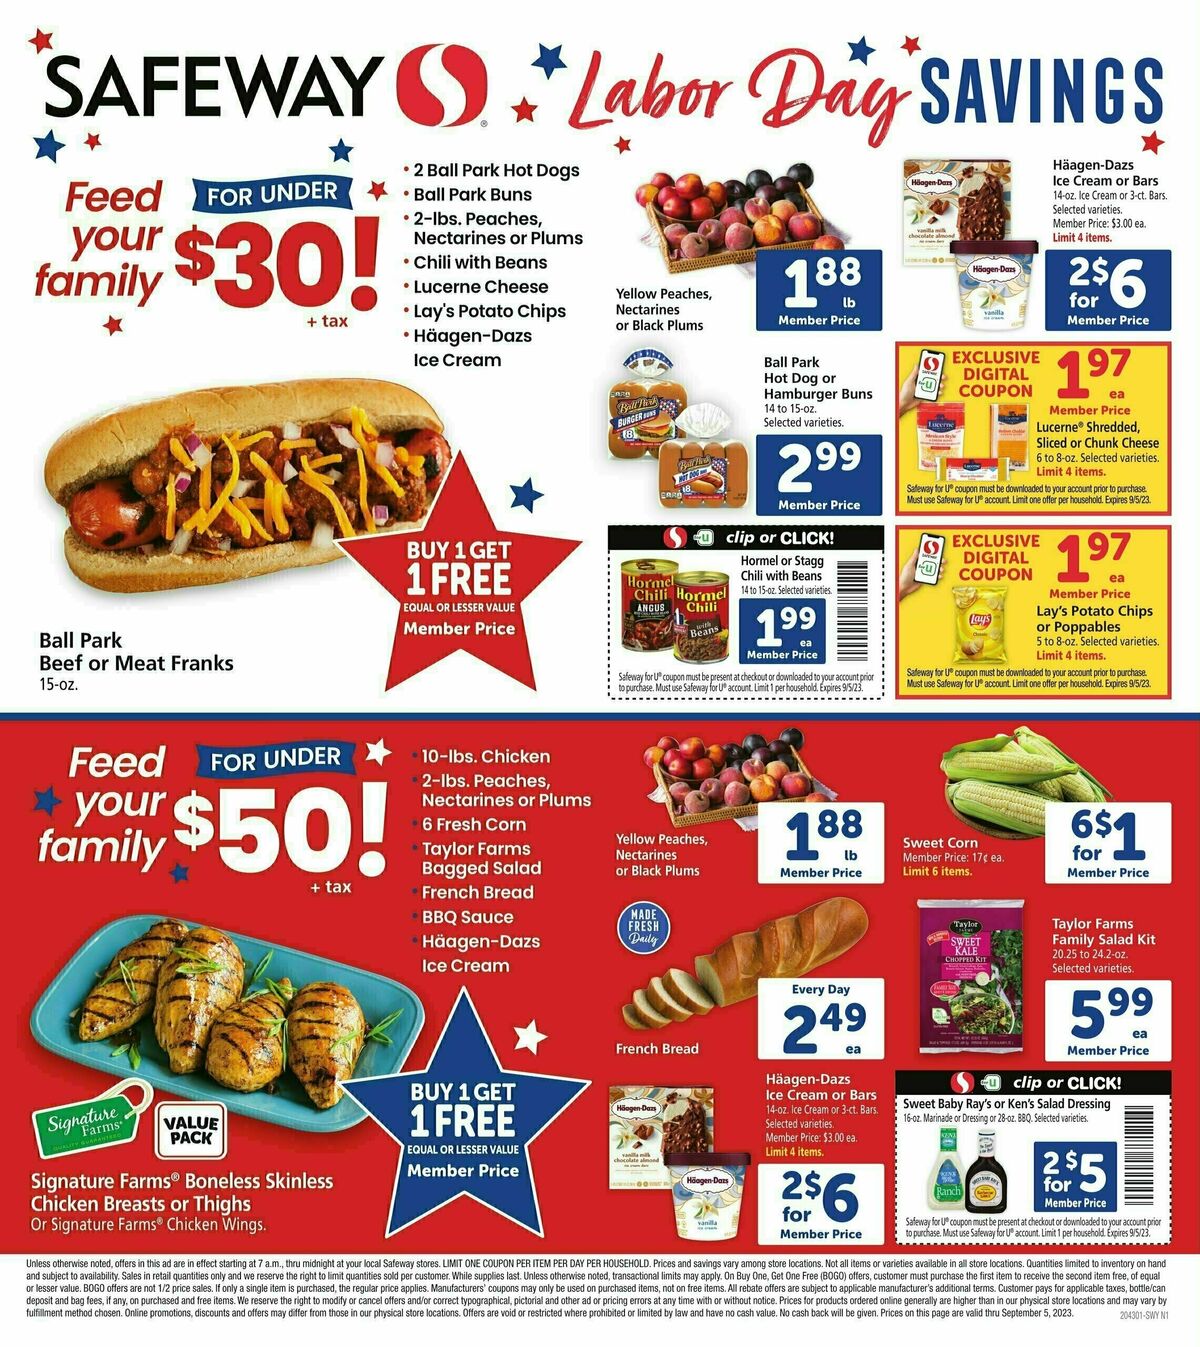 Safeway Specialty Publication Weekly Ad from August 30